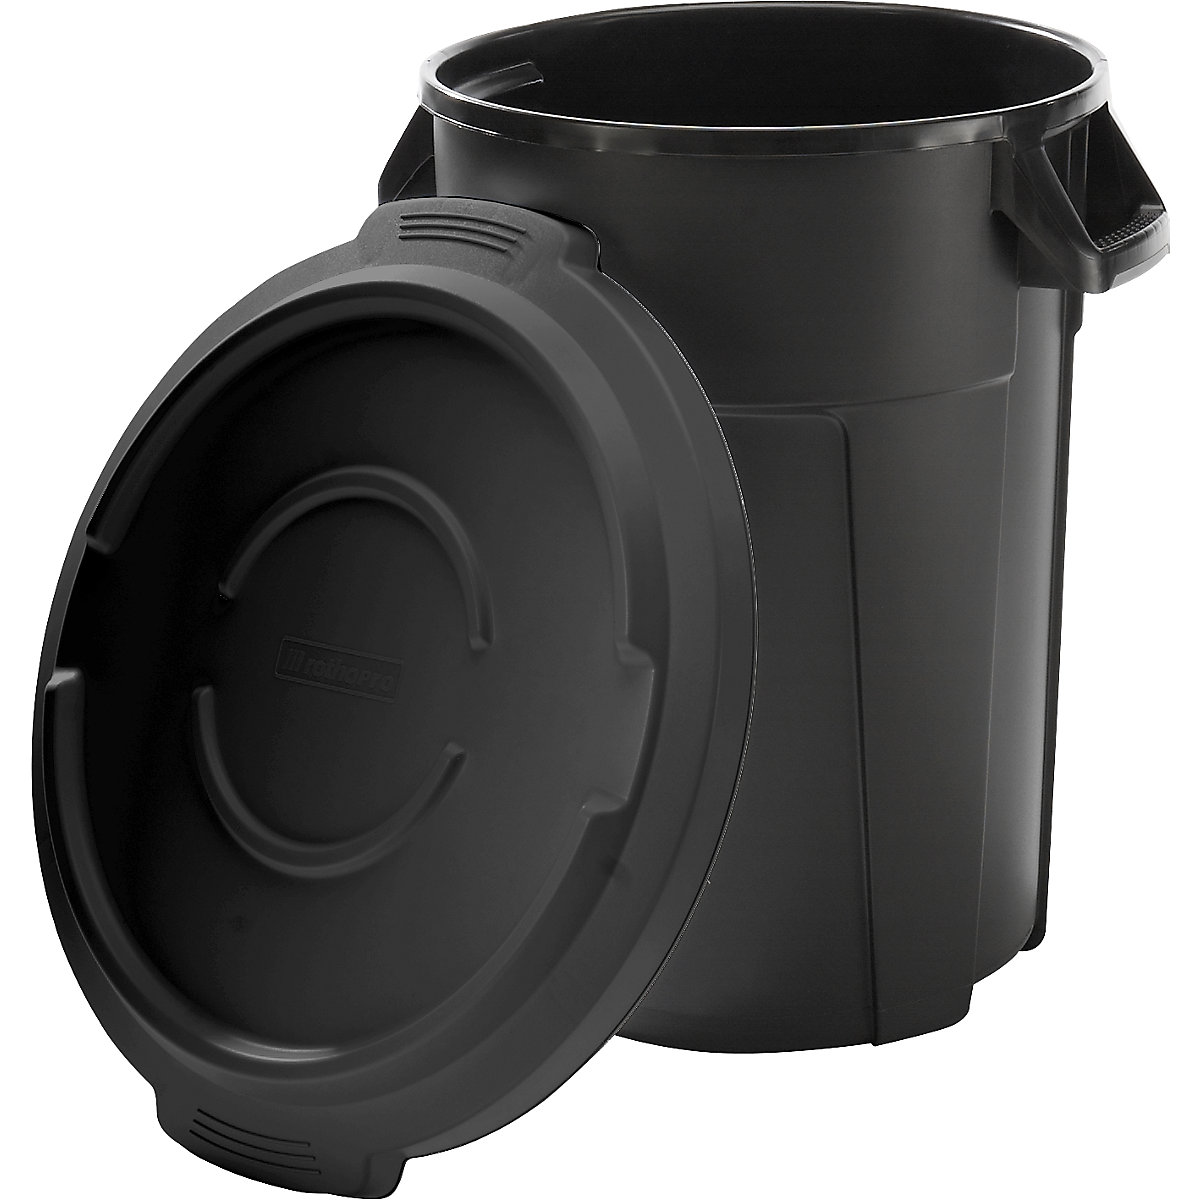 Multi-purpose container with lid - rothopro